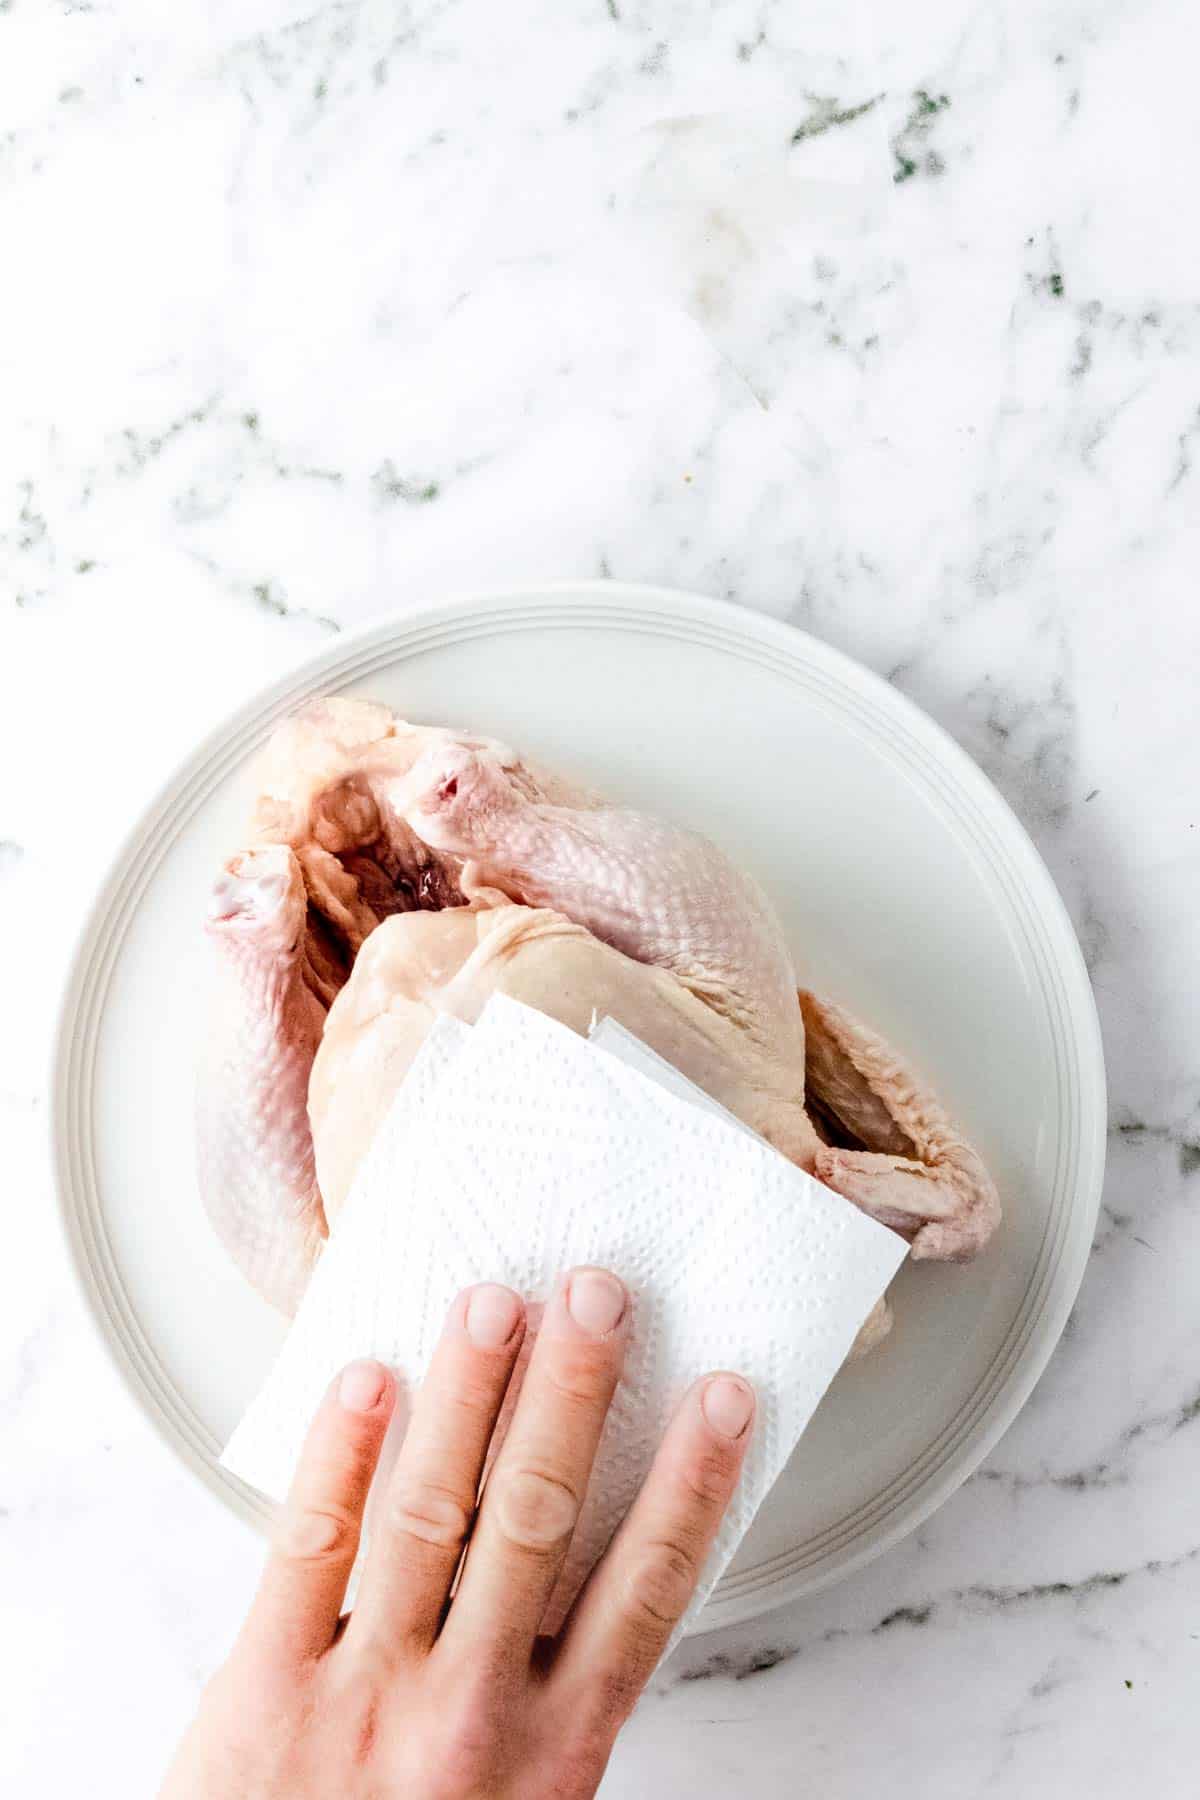 A hand using a paper towel to pat dry a whole raw chicken on a plate.